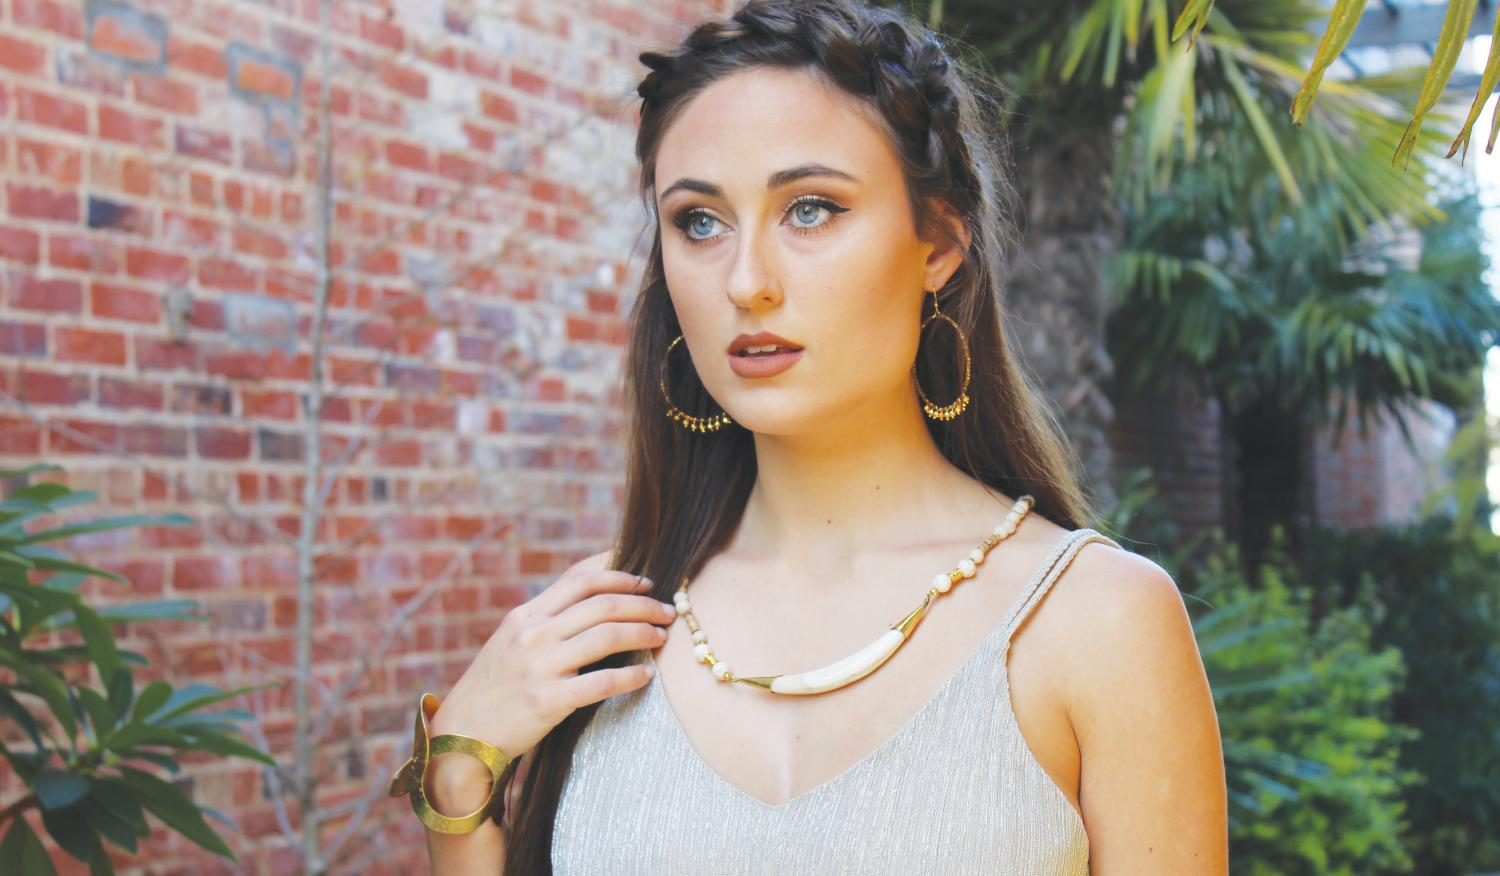 FMU senior Shaina Bazen models for a local business and hopes to continue working in the fashion industry after college 